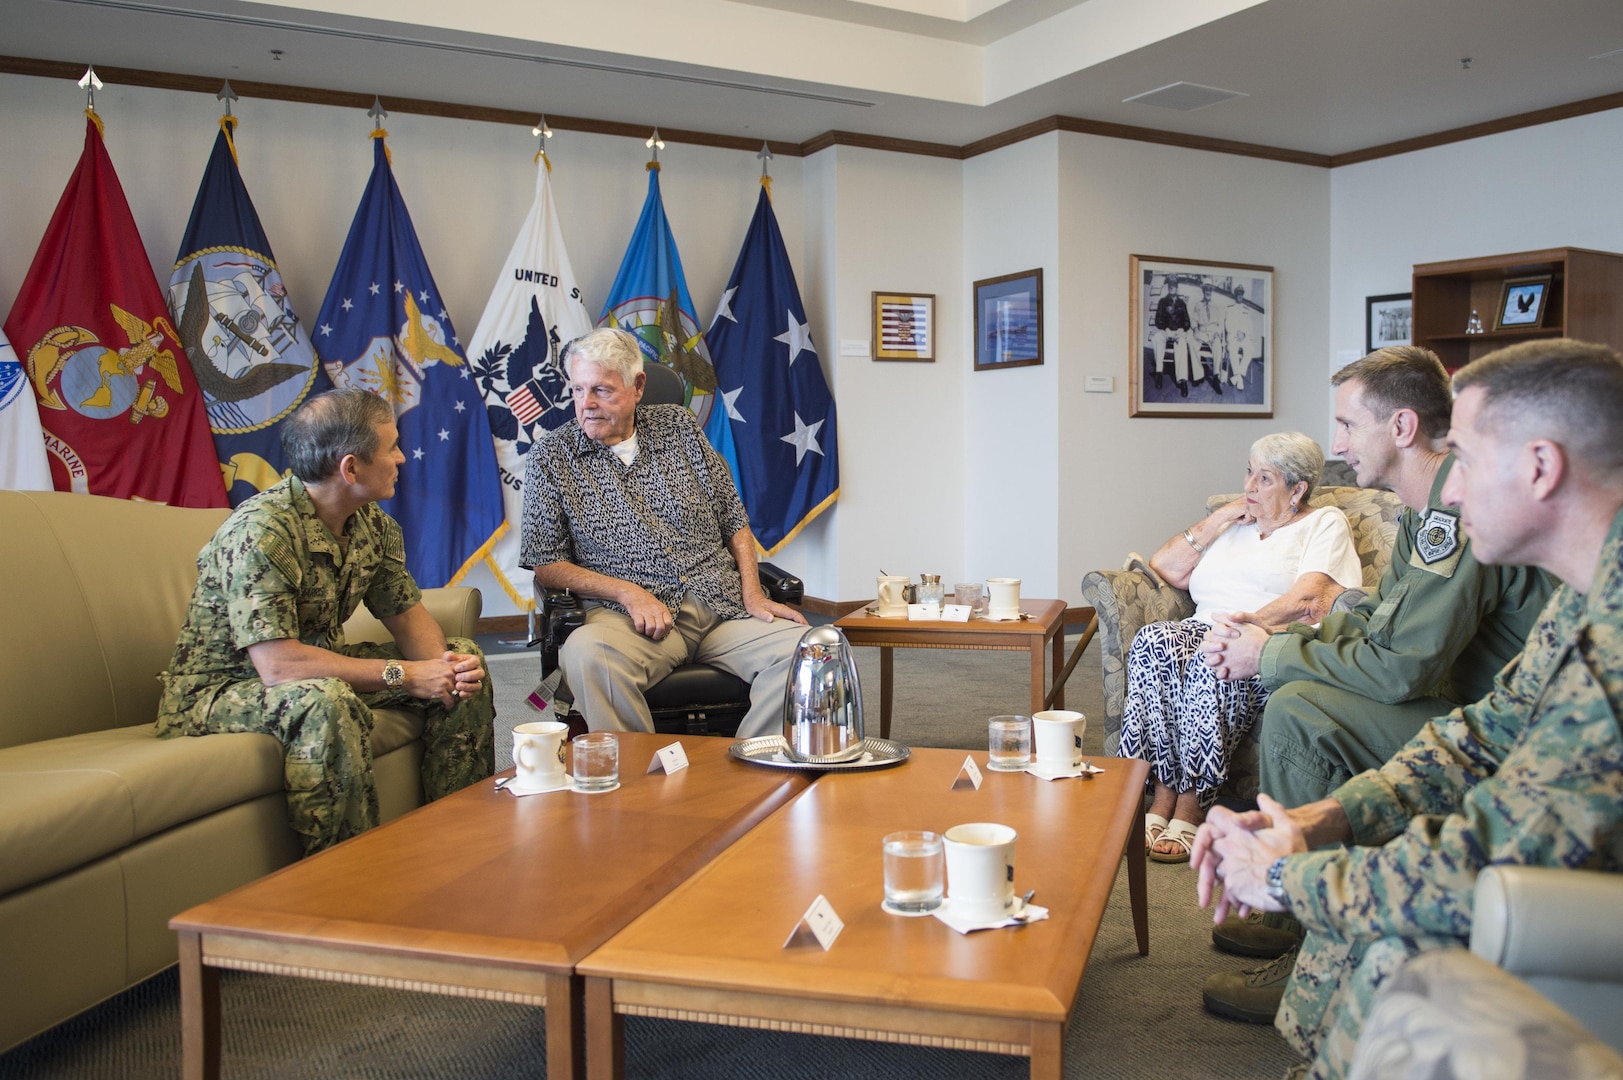 161208-N-DX698-036 CAMP H.M. SMITH, Hawaii (Dec. 8, 2016) Commander, U.S. Pacific Command, Adm. Harry Harris welcomes the WWII and former POW veteran, Sgt. George Emerson and his wife during their visit to the PACOM headquarters. Emerson was invited on behalf of Harris after he was unable to attend the official 75th Anniversary Commemoration on Dec. 7th in Pearl Harbor. Emerson served in the U.S. Army Air Corps and was captured by German forces when his plane was destroyed during an attack. (U.S. Navy photo by Petty Officer 1st Class Jay M. Chu/Released)